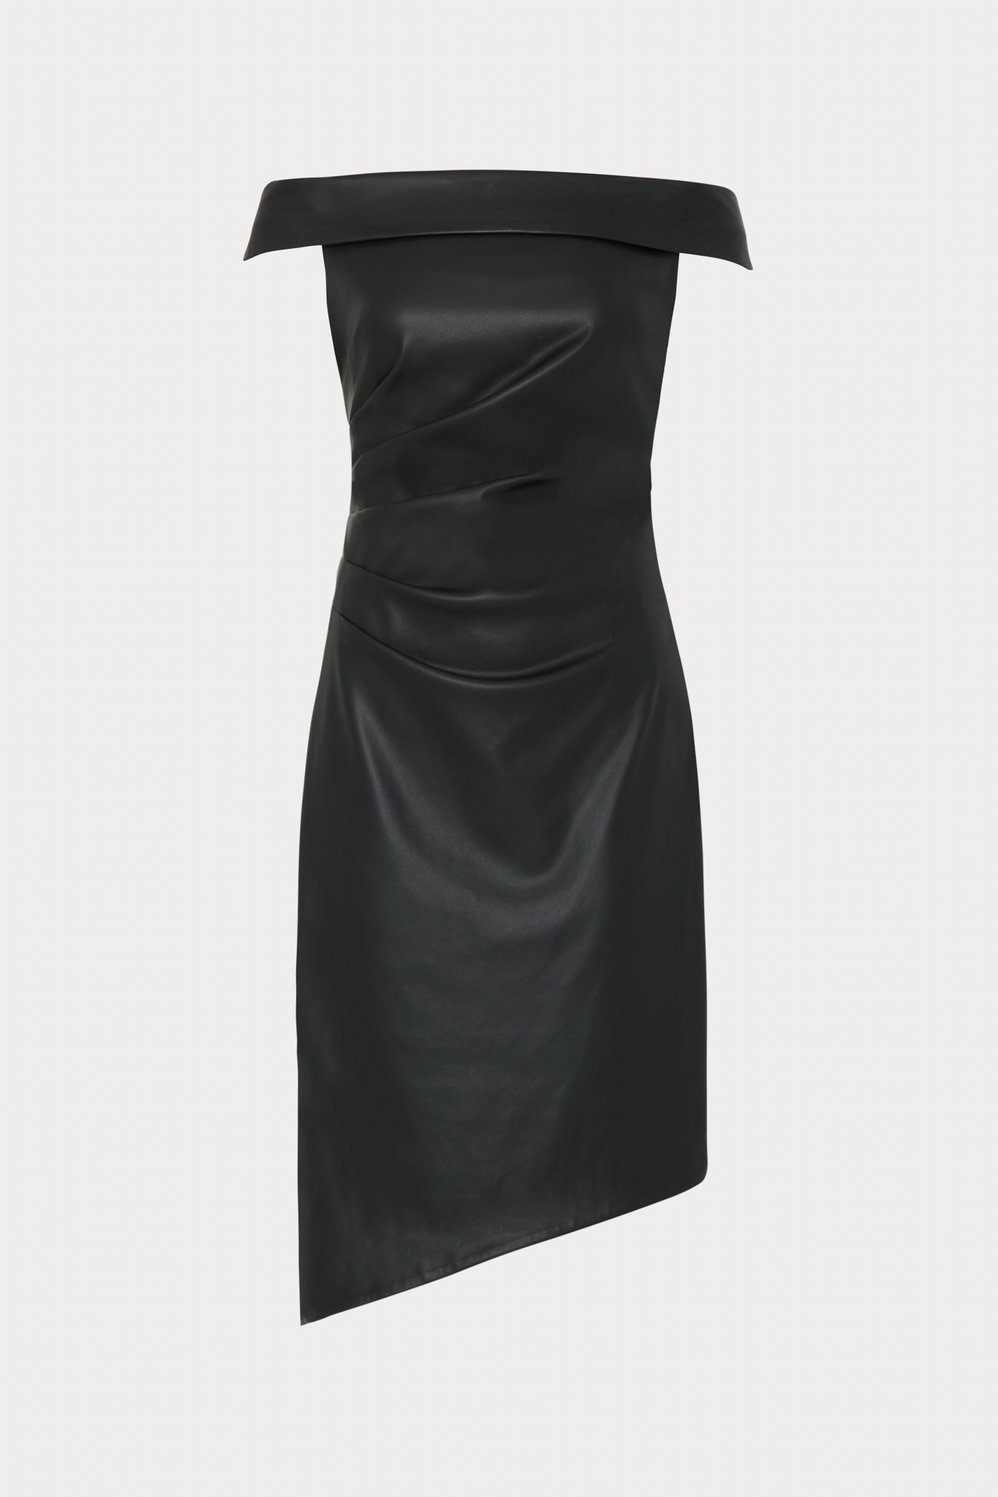 Shop the Ally Vegan Leather Dress from MILLY